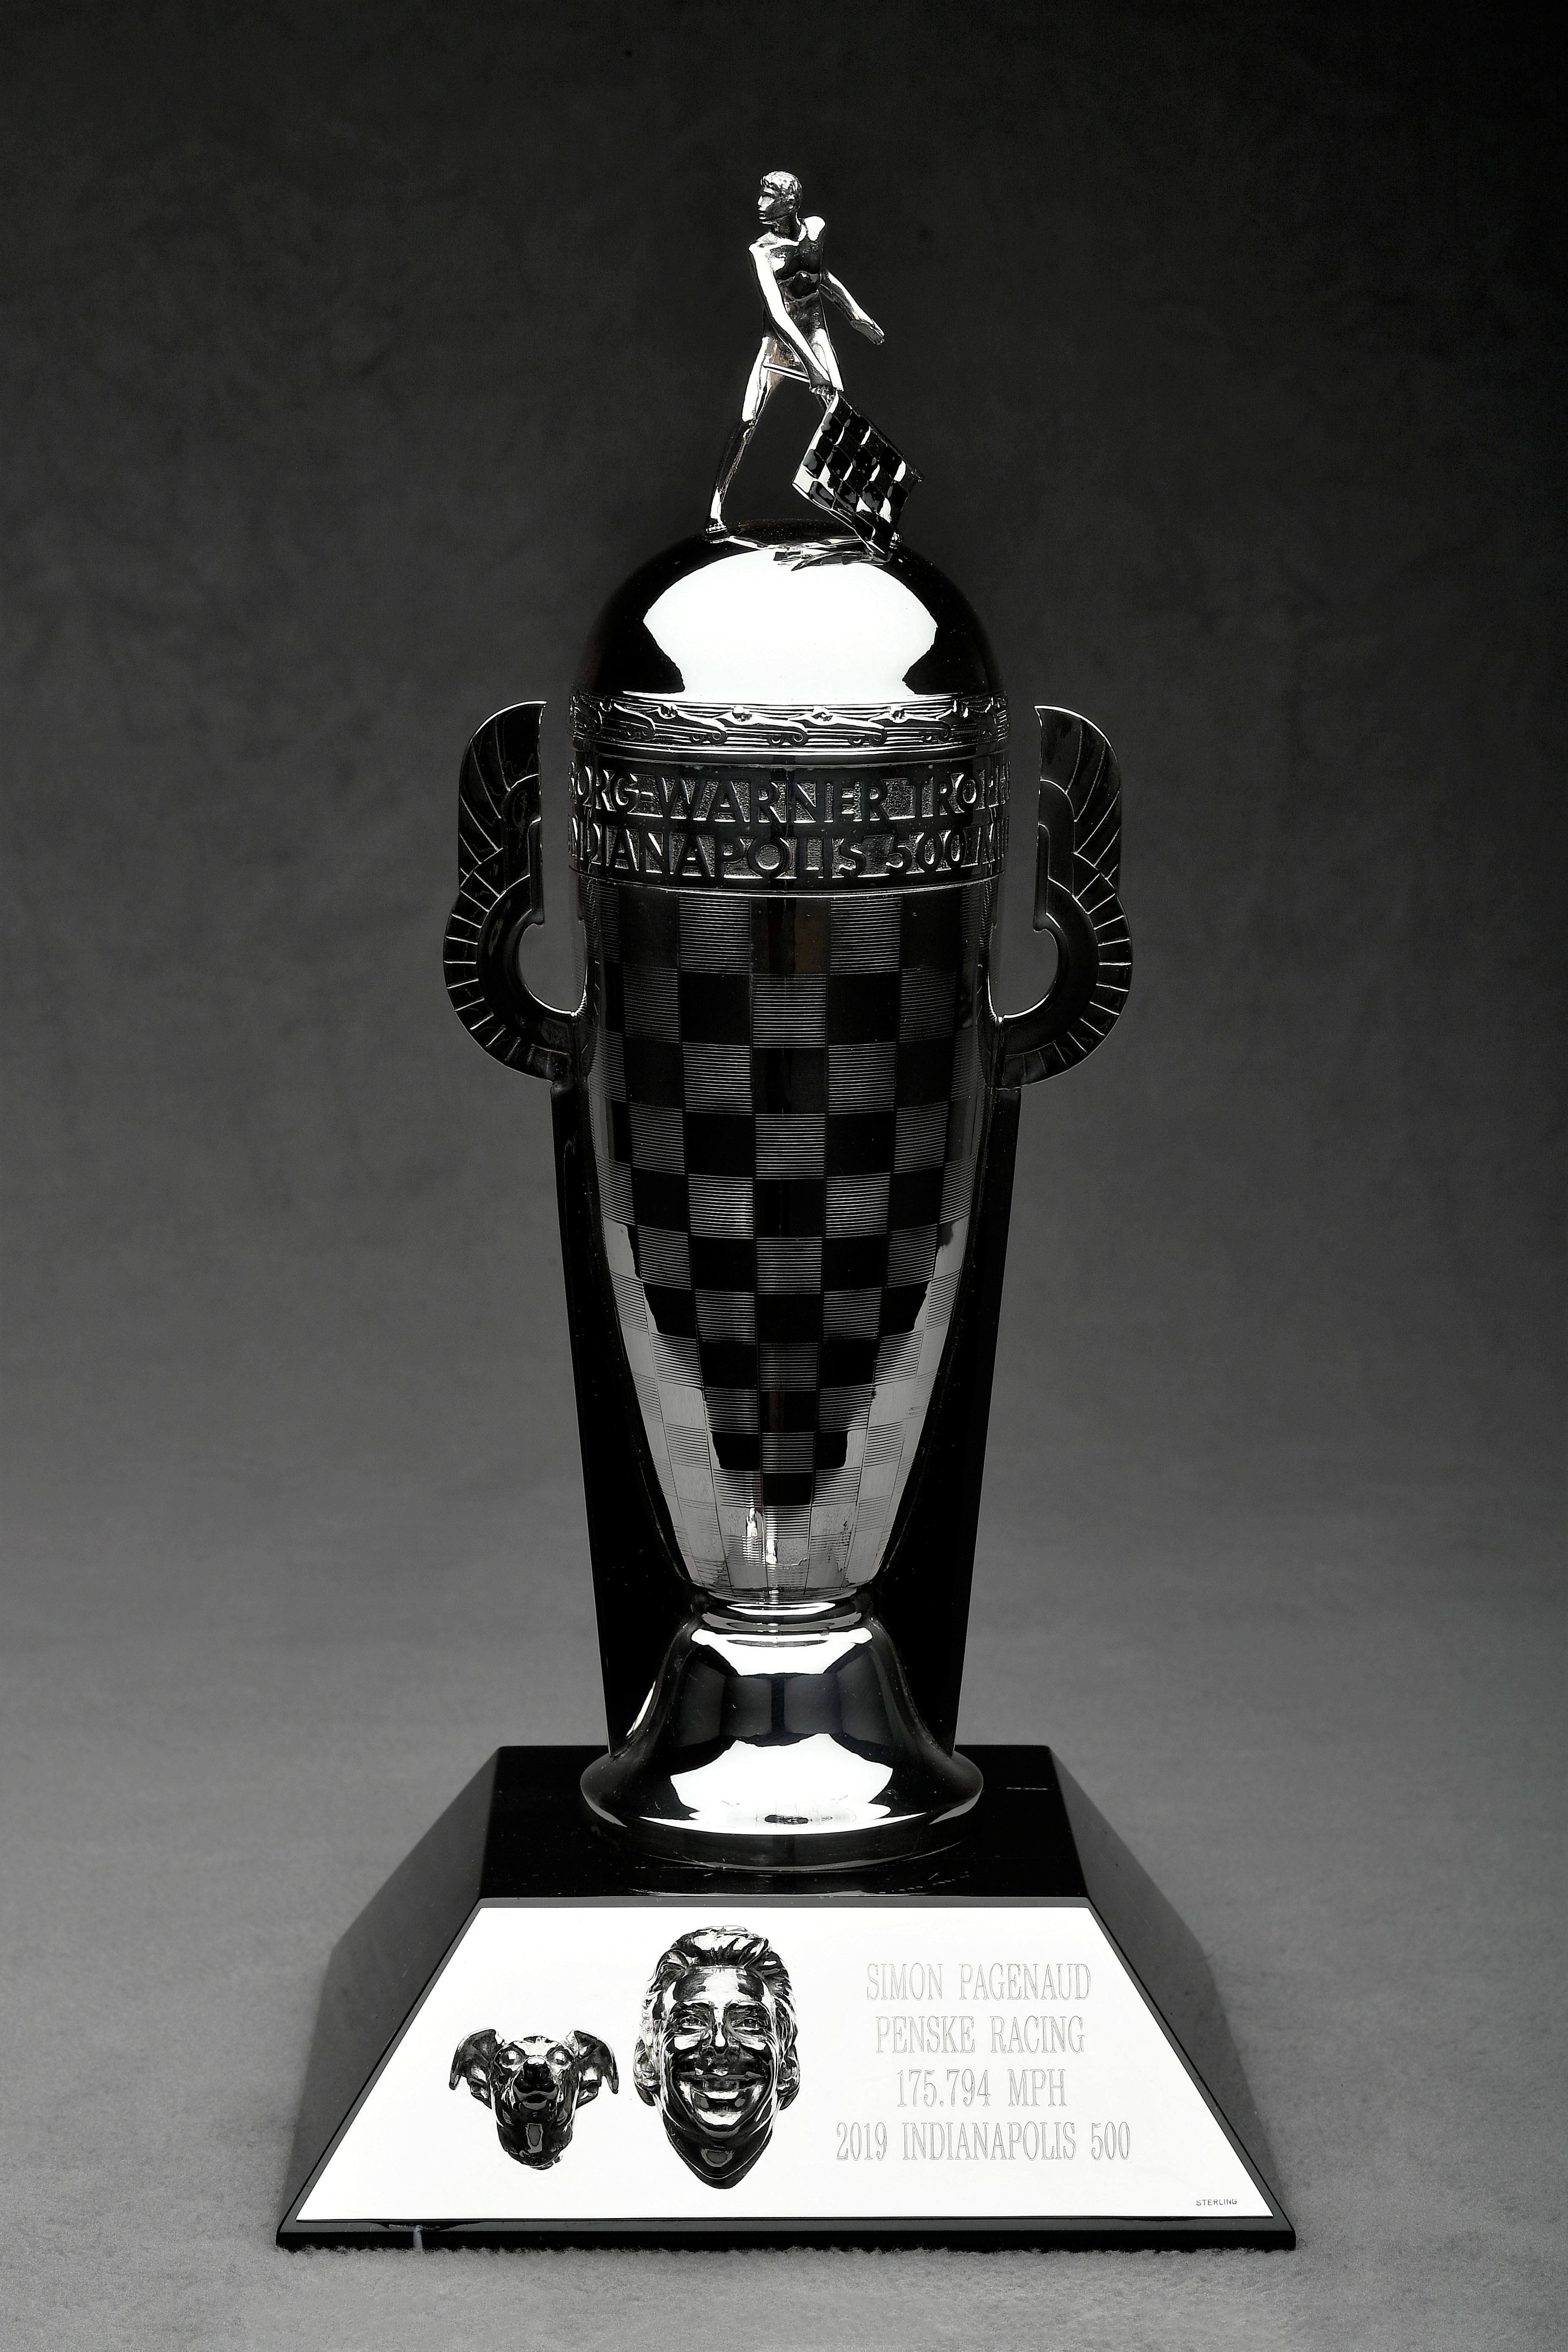 a silver trophy with a checkered design